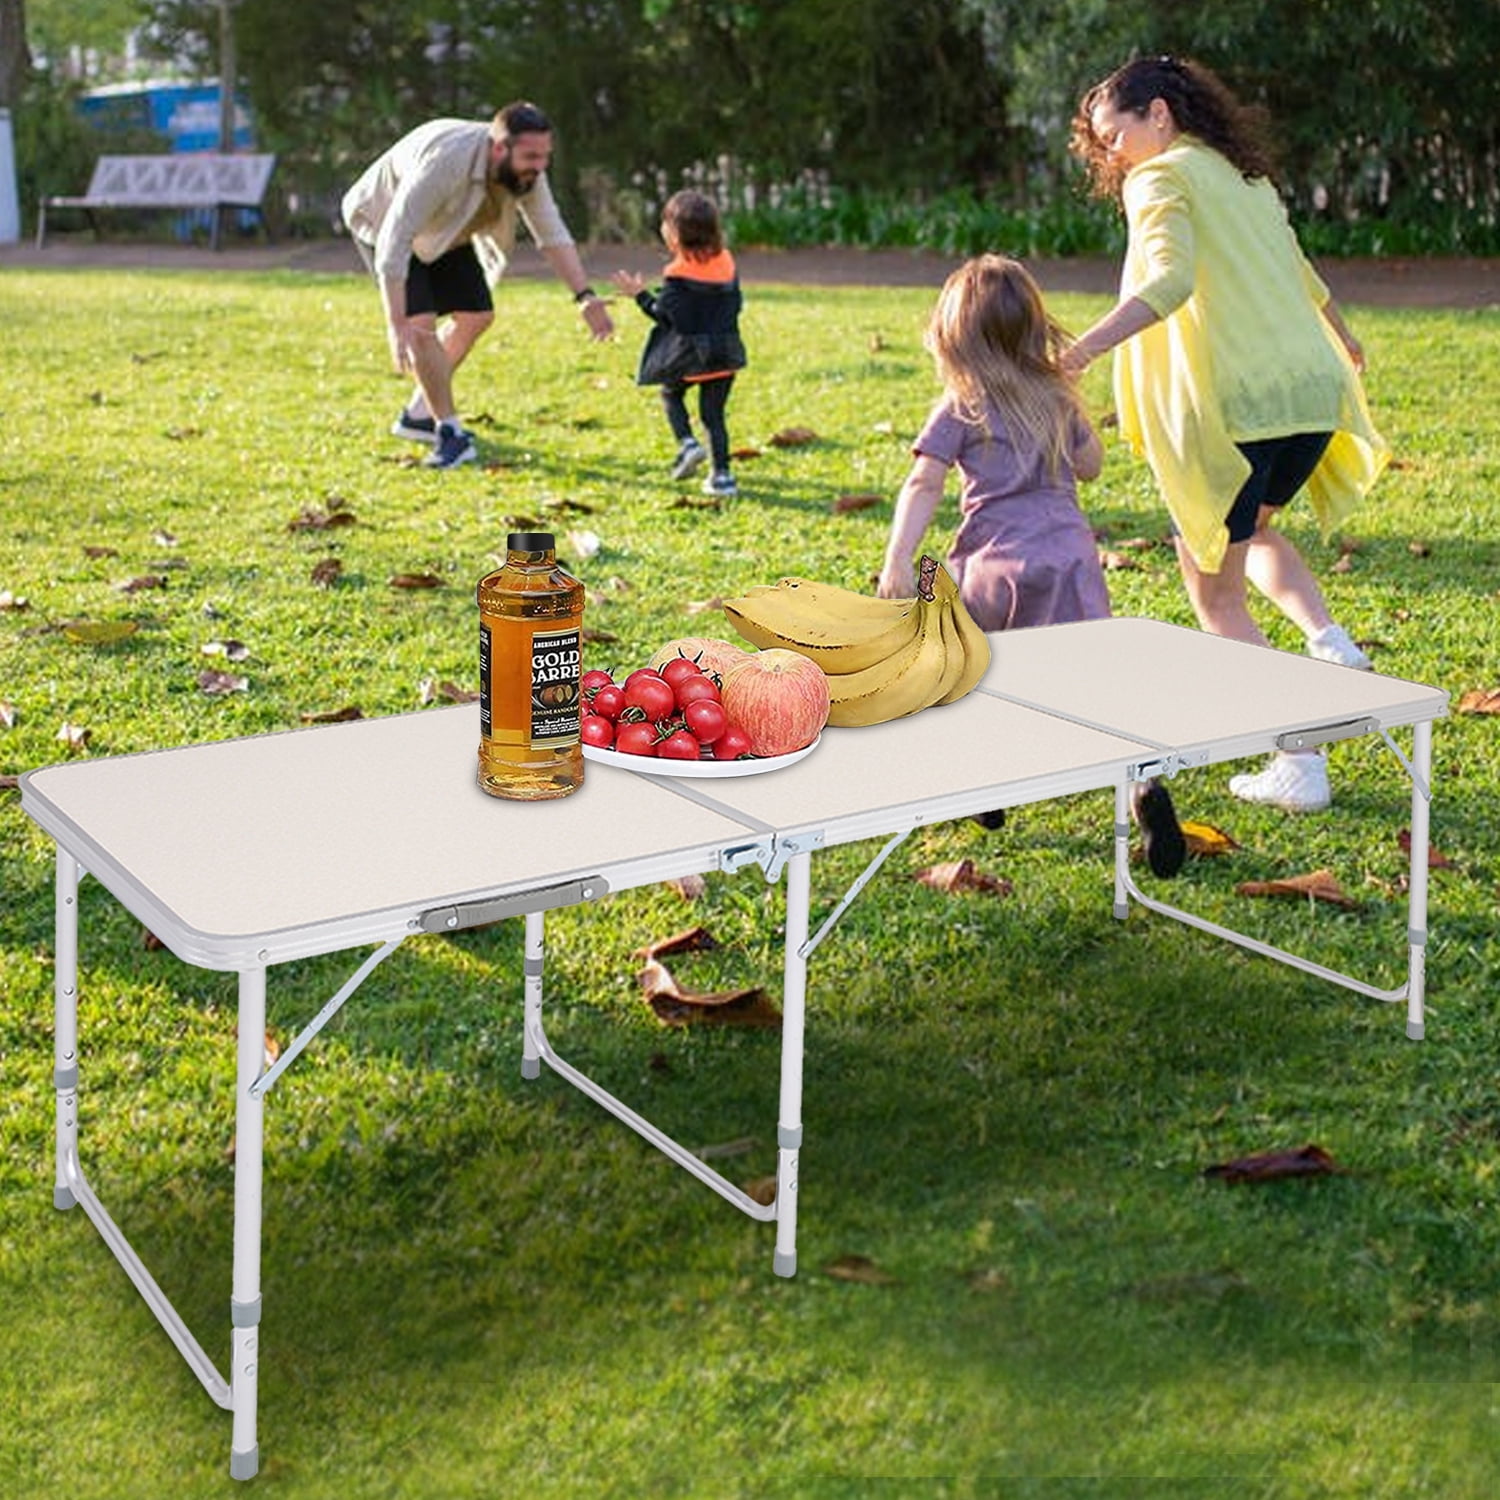 Folding Table 180x60 x70cm Space-Saving Collapsible Table White Picnic BBQ Table 